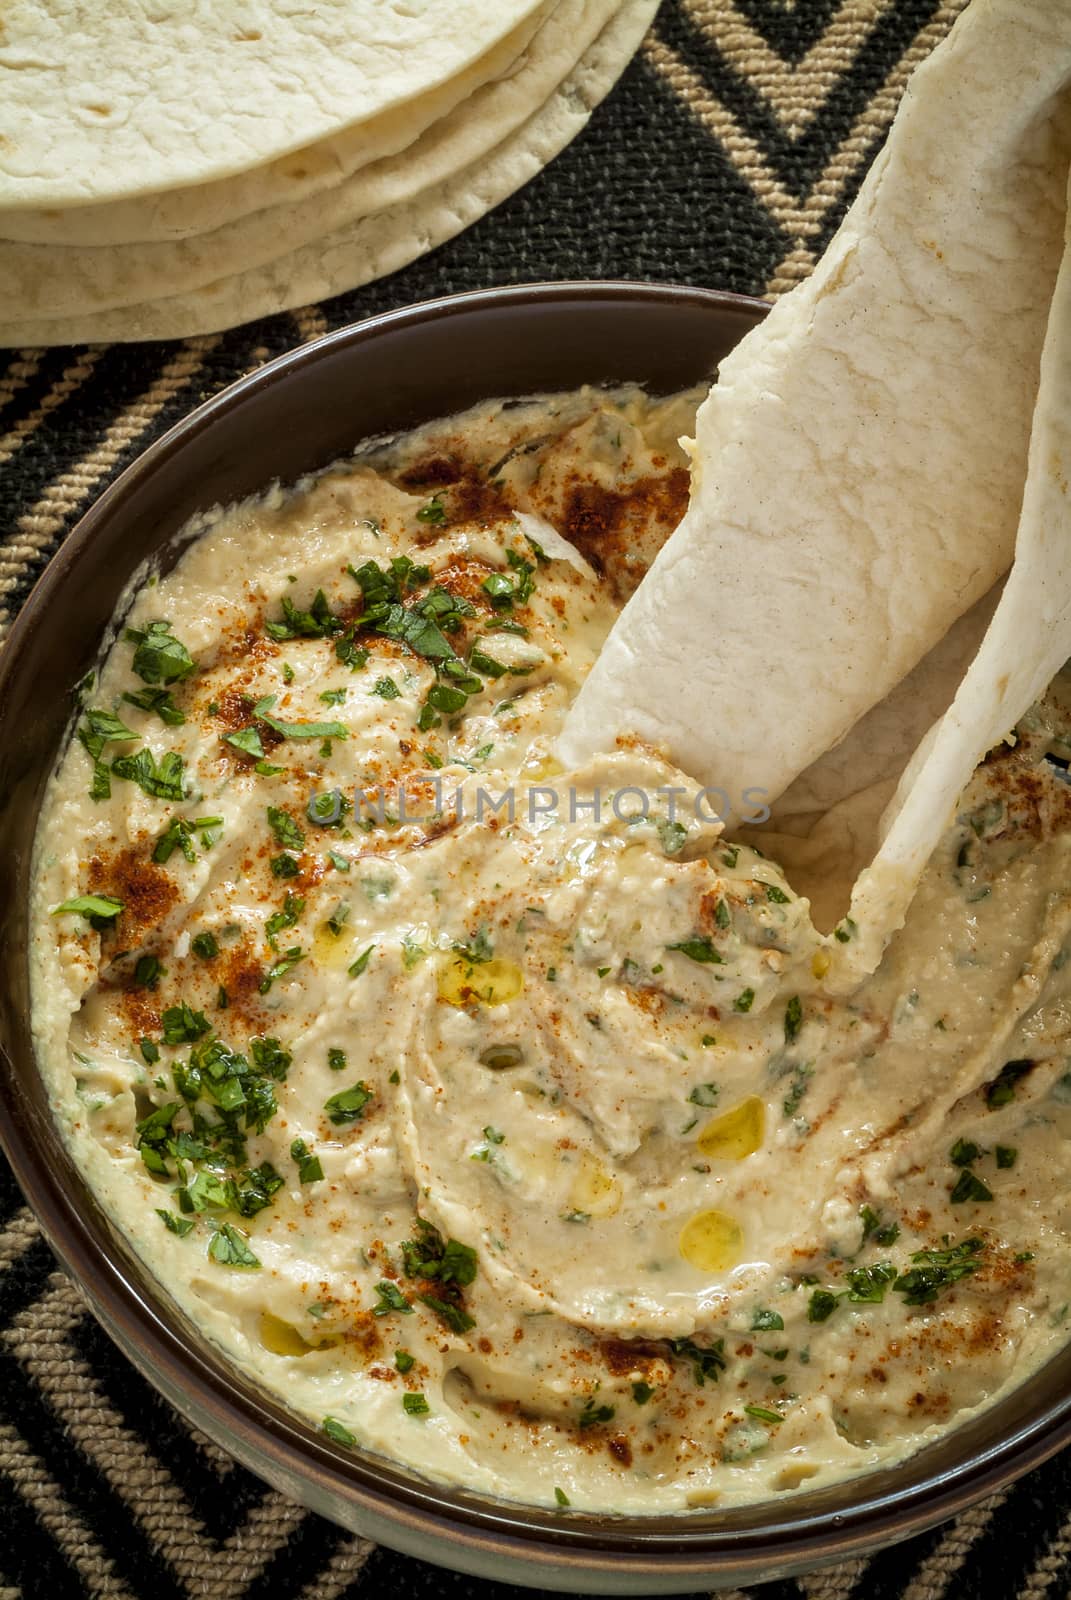 A closeup image of a bowl with a delicious and creamy hummus dip with flat bread.